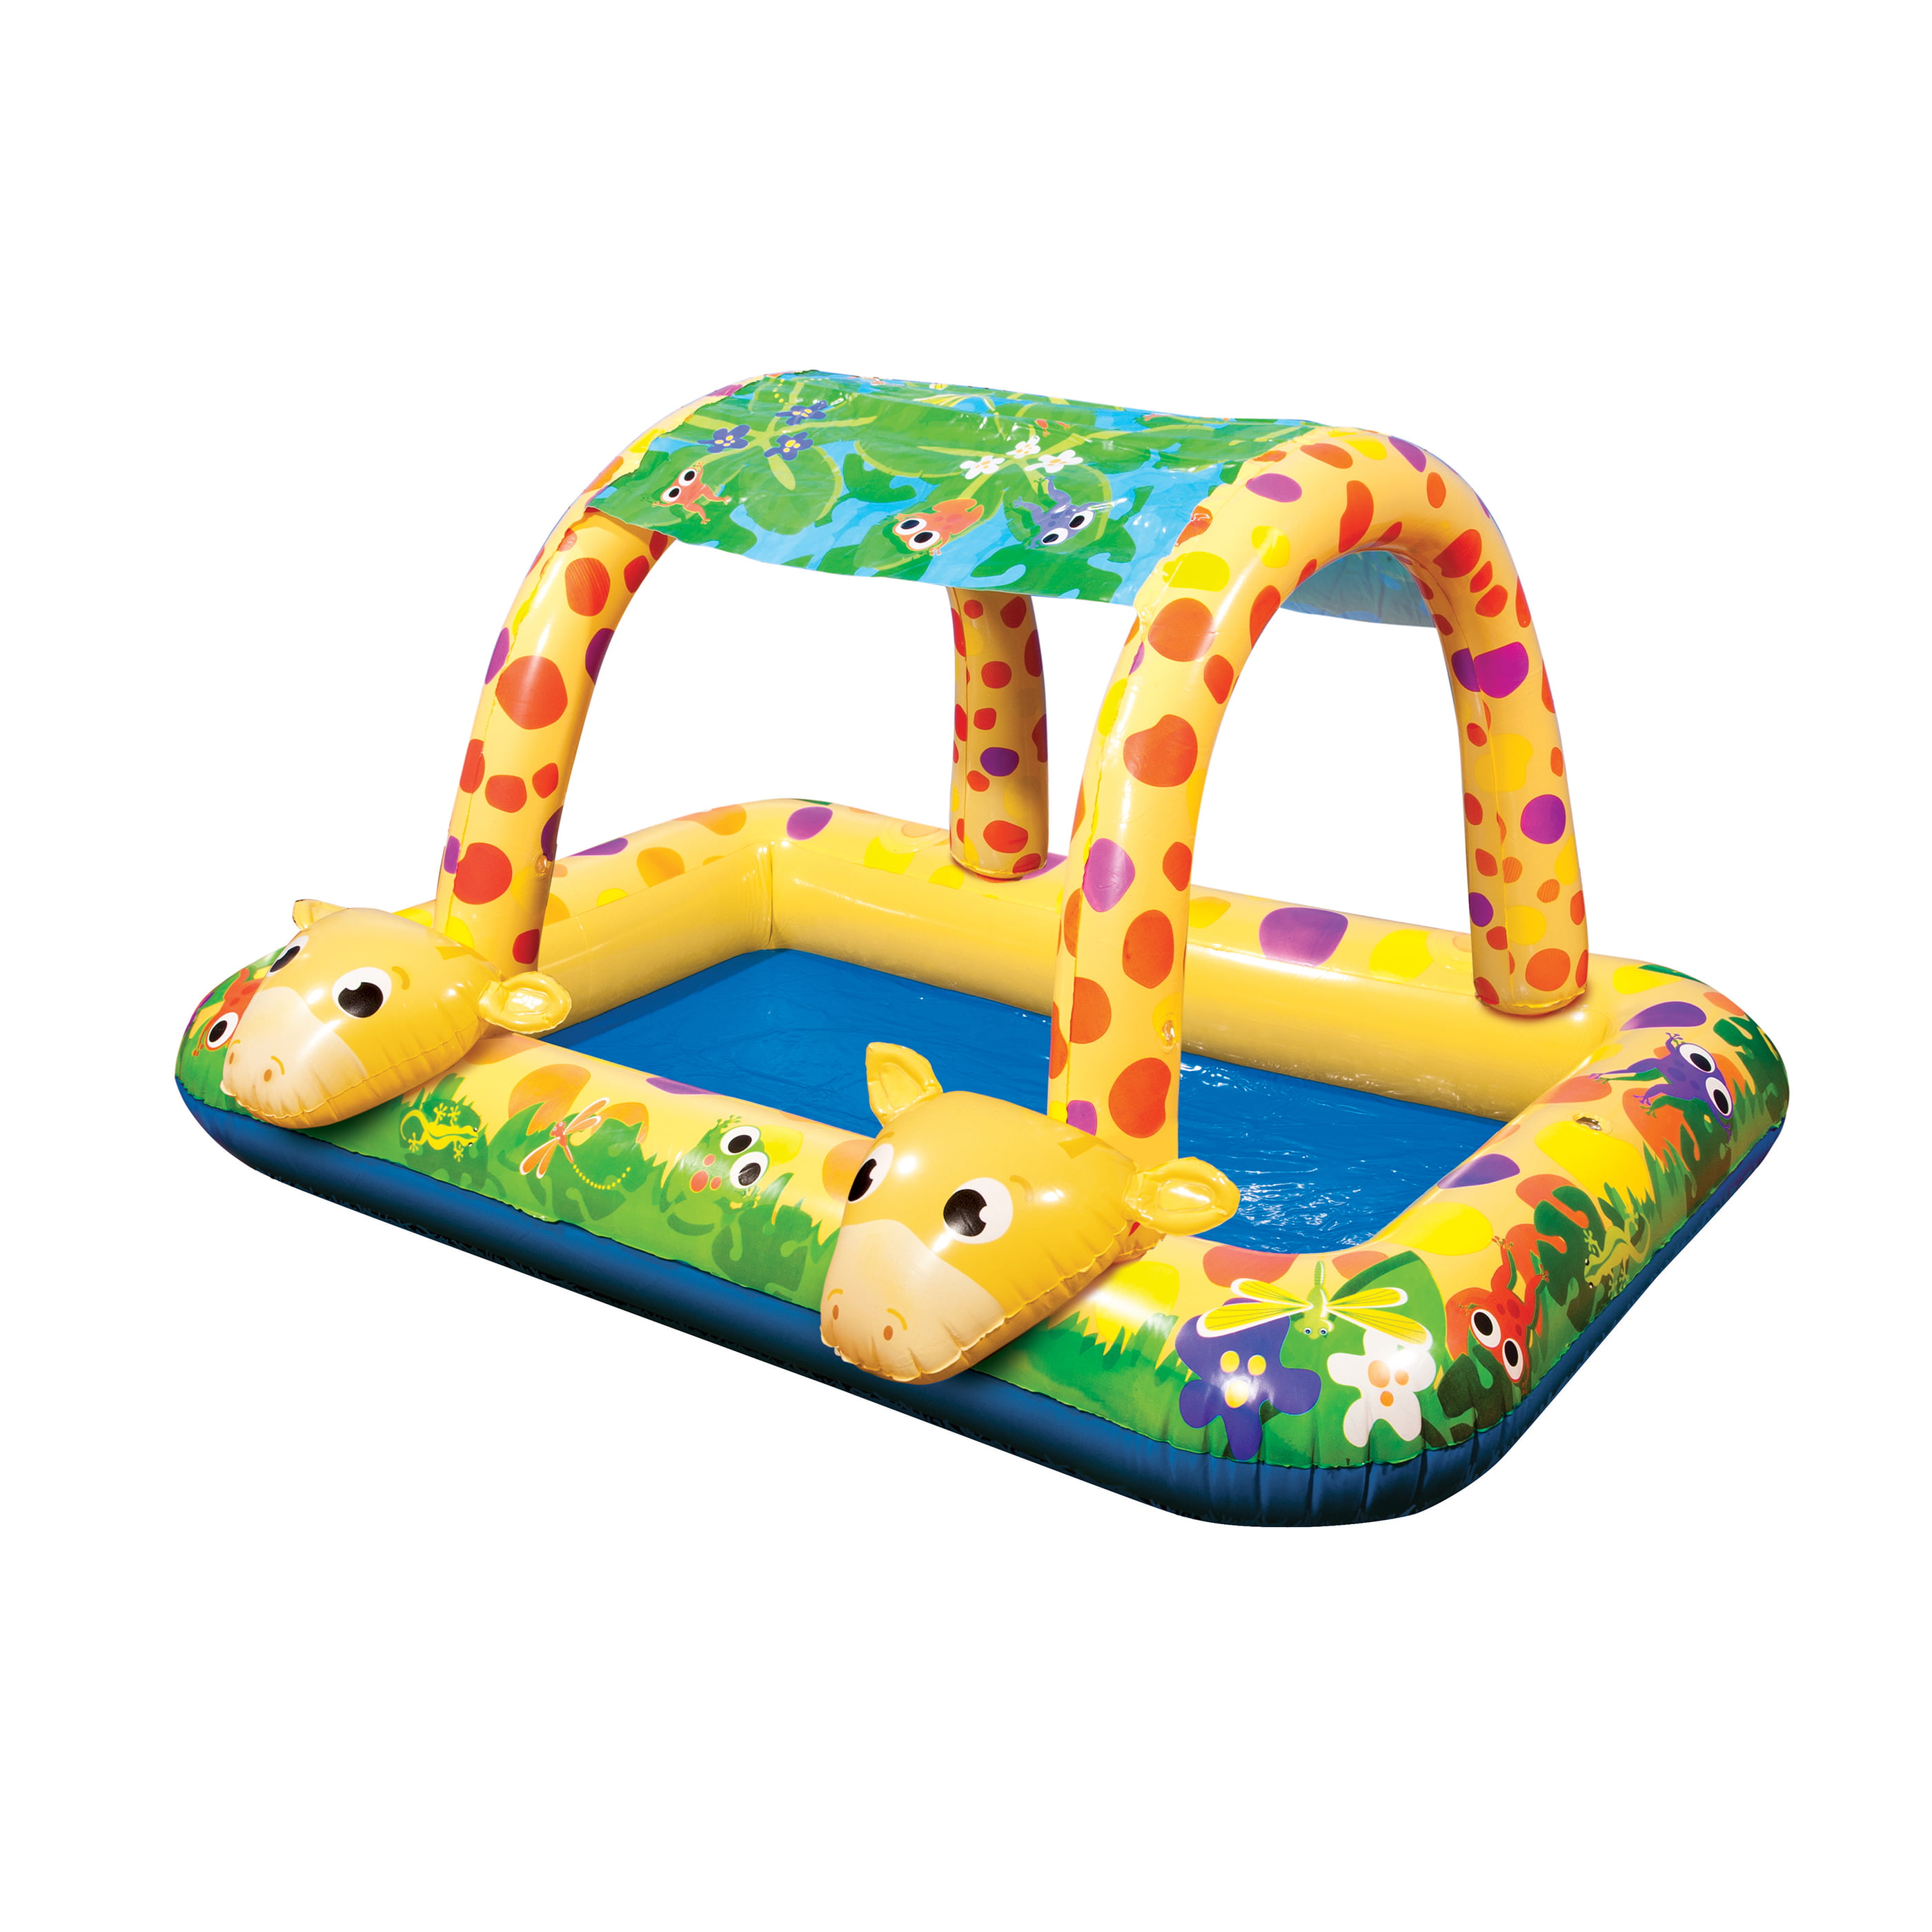 Spring & Summer Toys Banzai Shade ‘N Sun Lion Pool with Removable Canopy